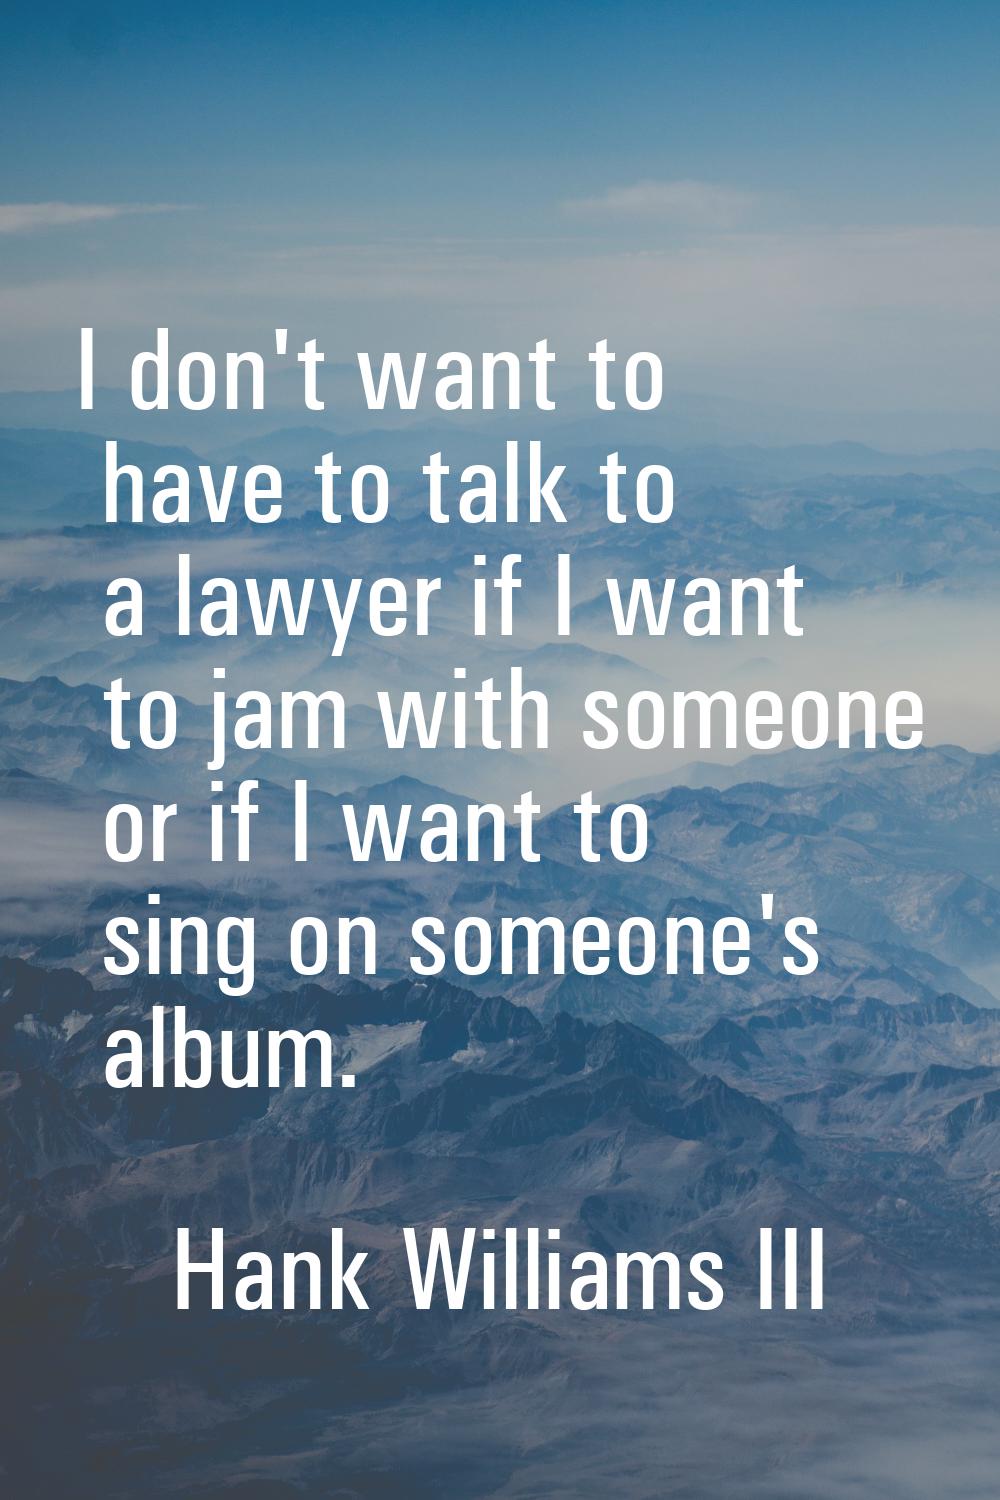 I don't want to have to talk to a lawyer if I want to jam with someone or if I want to sing on some